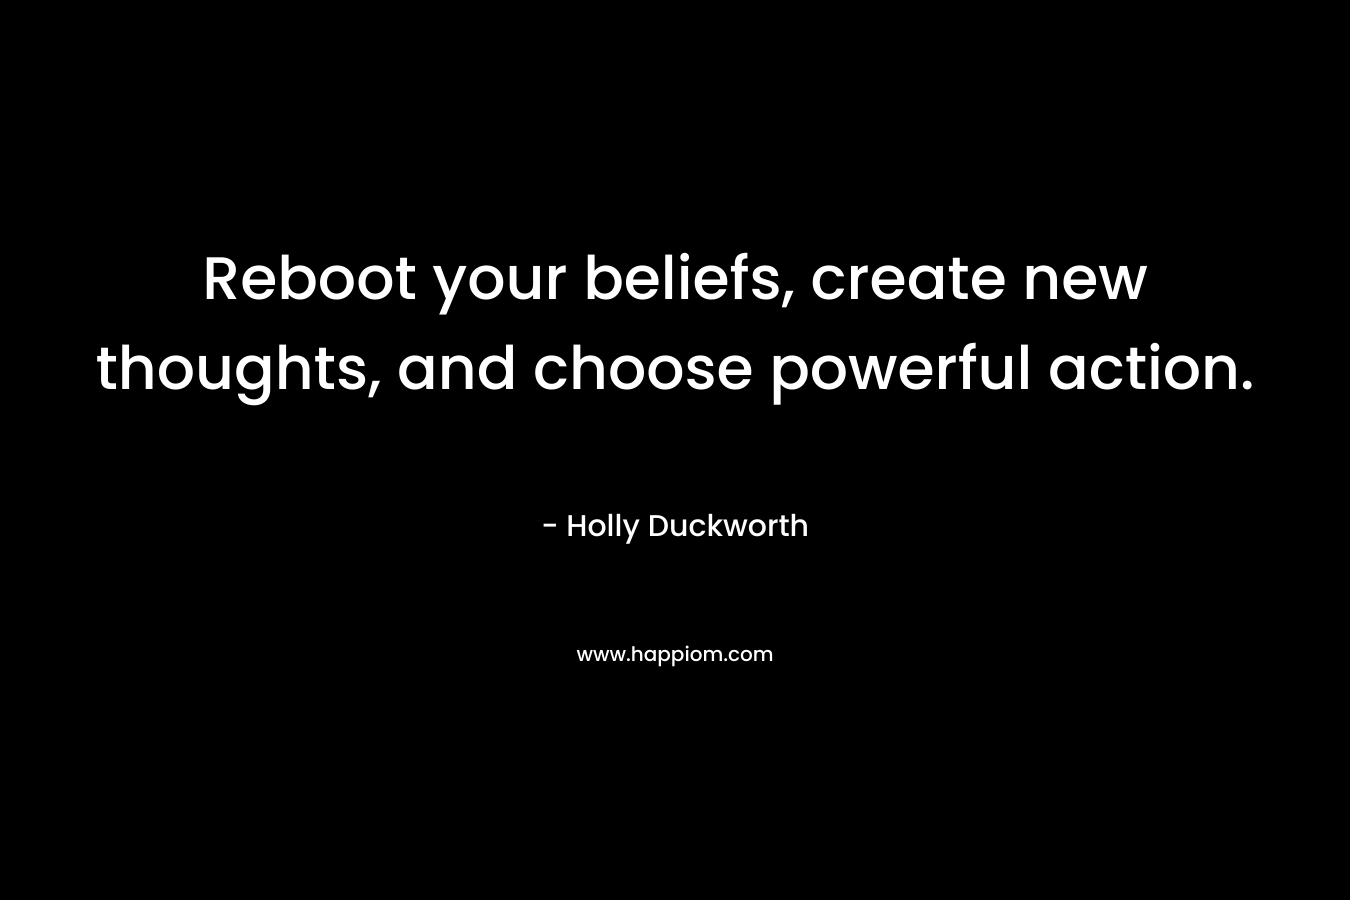 Reboot your beliefs, create new thoughts, and choose powerful action.